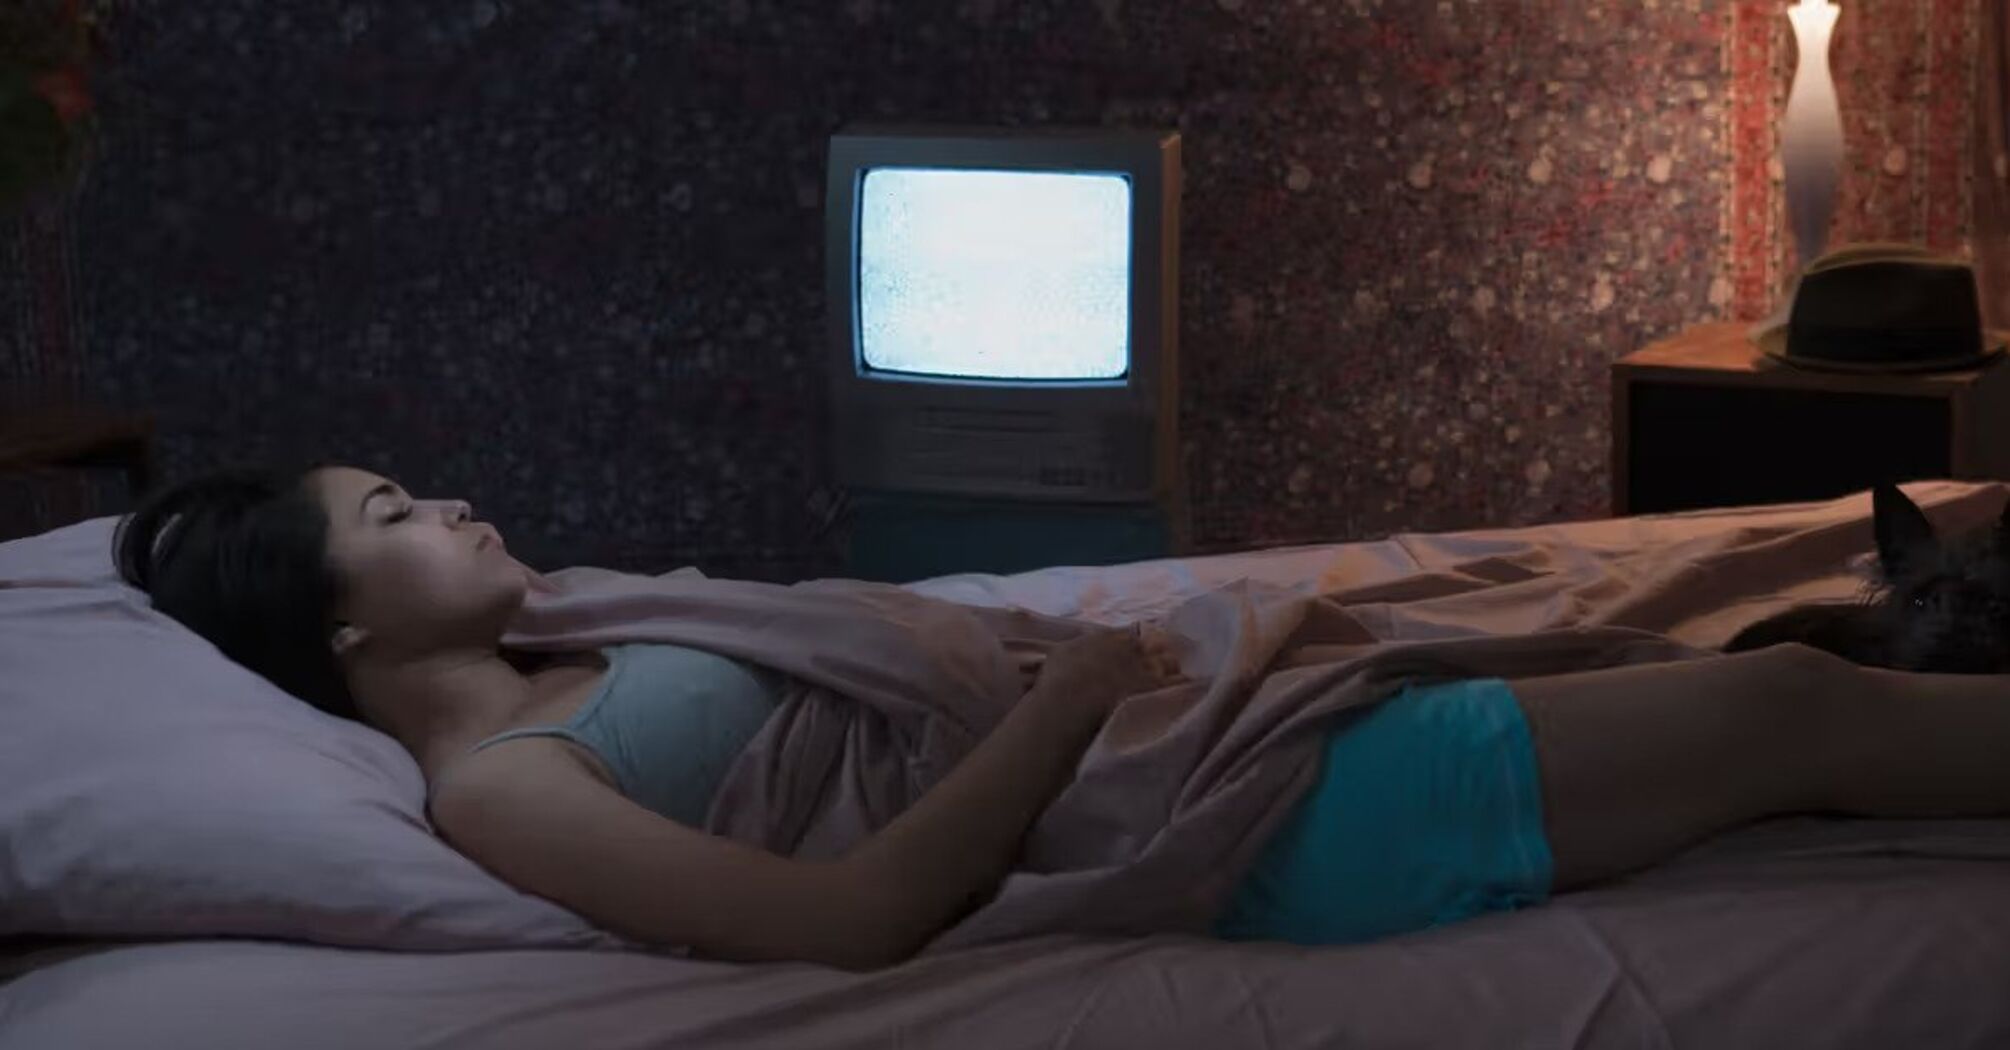 Pros and cons of having a TV in the bedroom